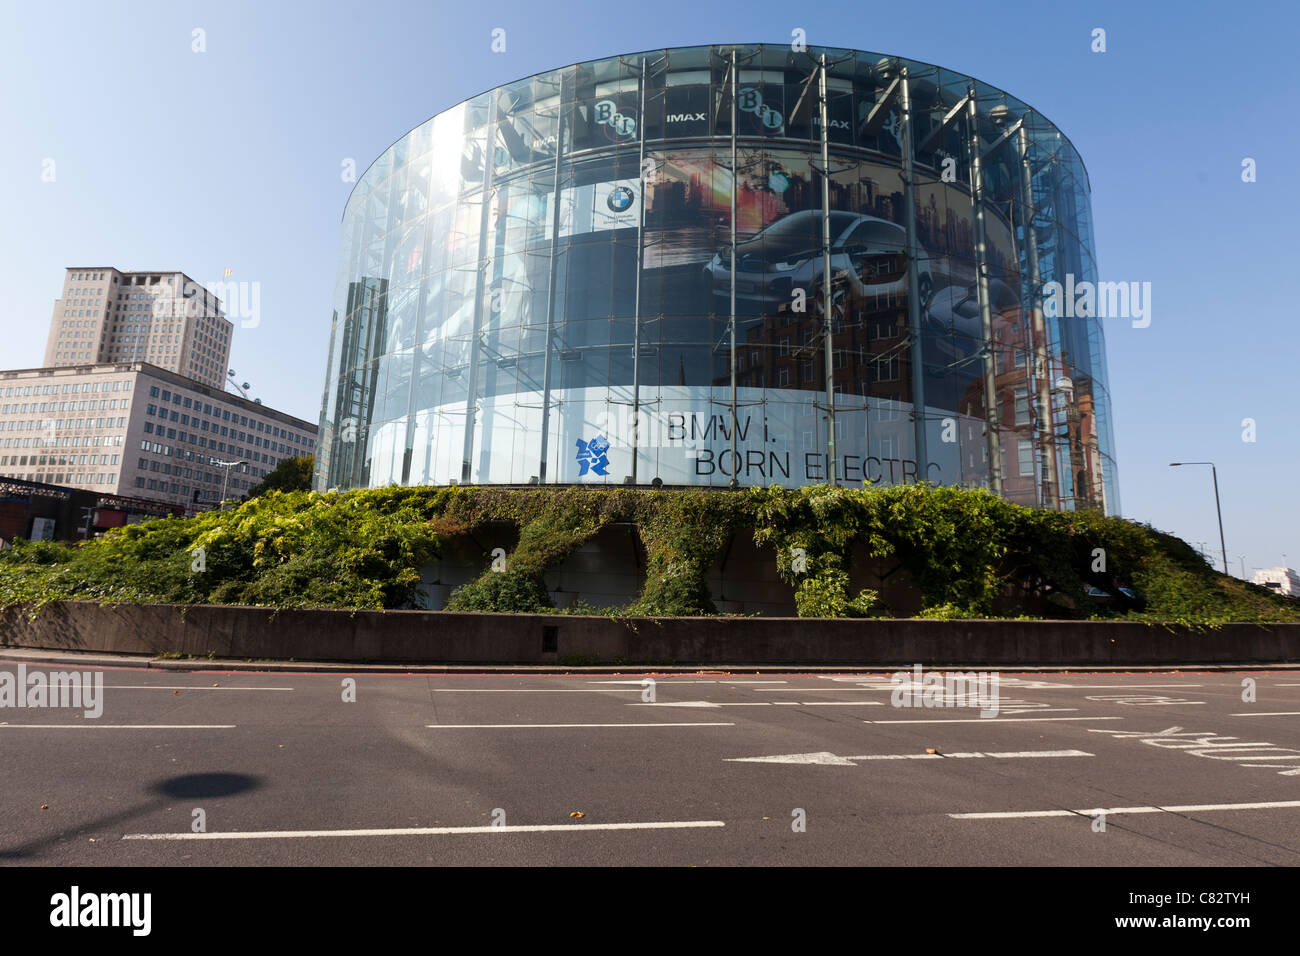 London IMAX cinema in the South Bank district of London Stock Photo